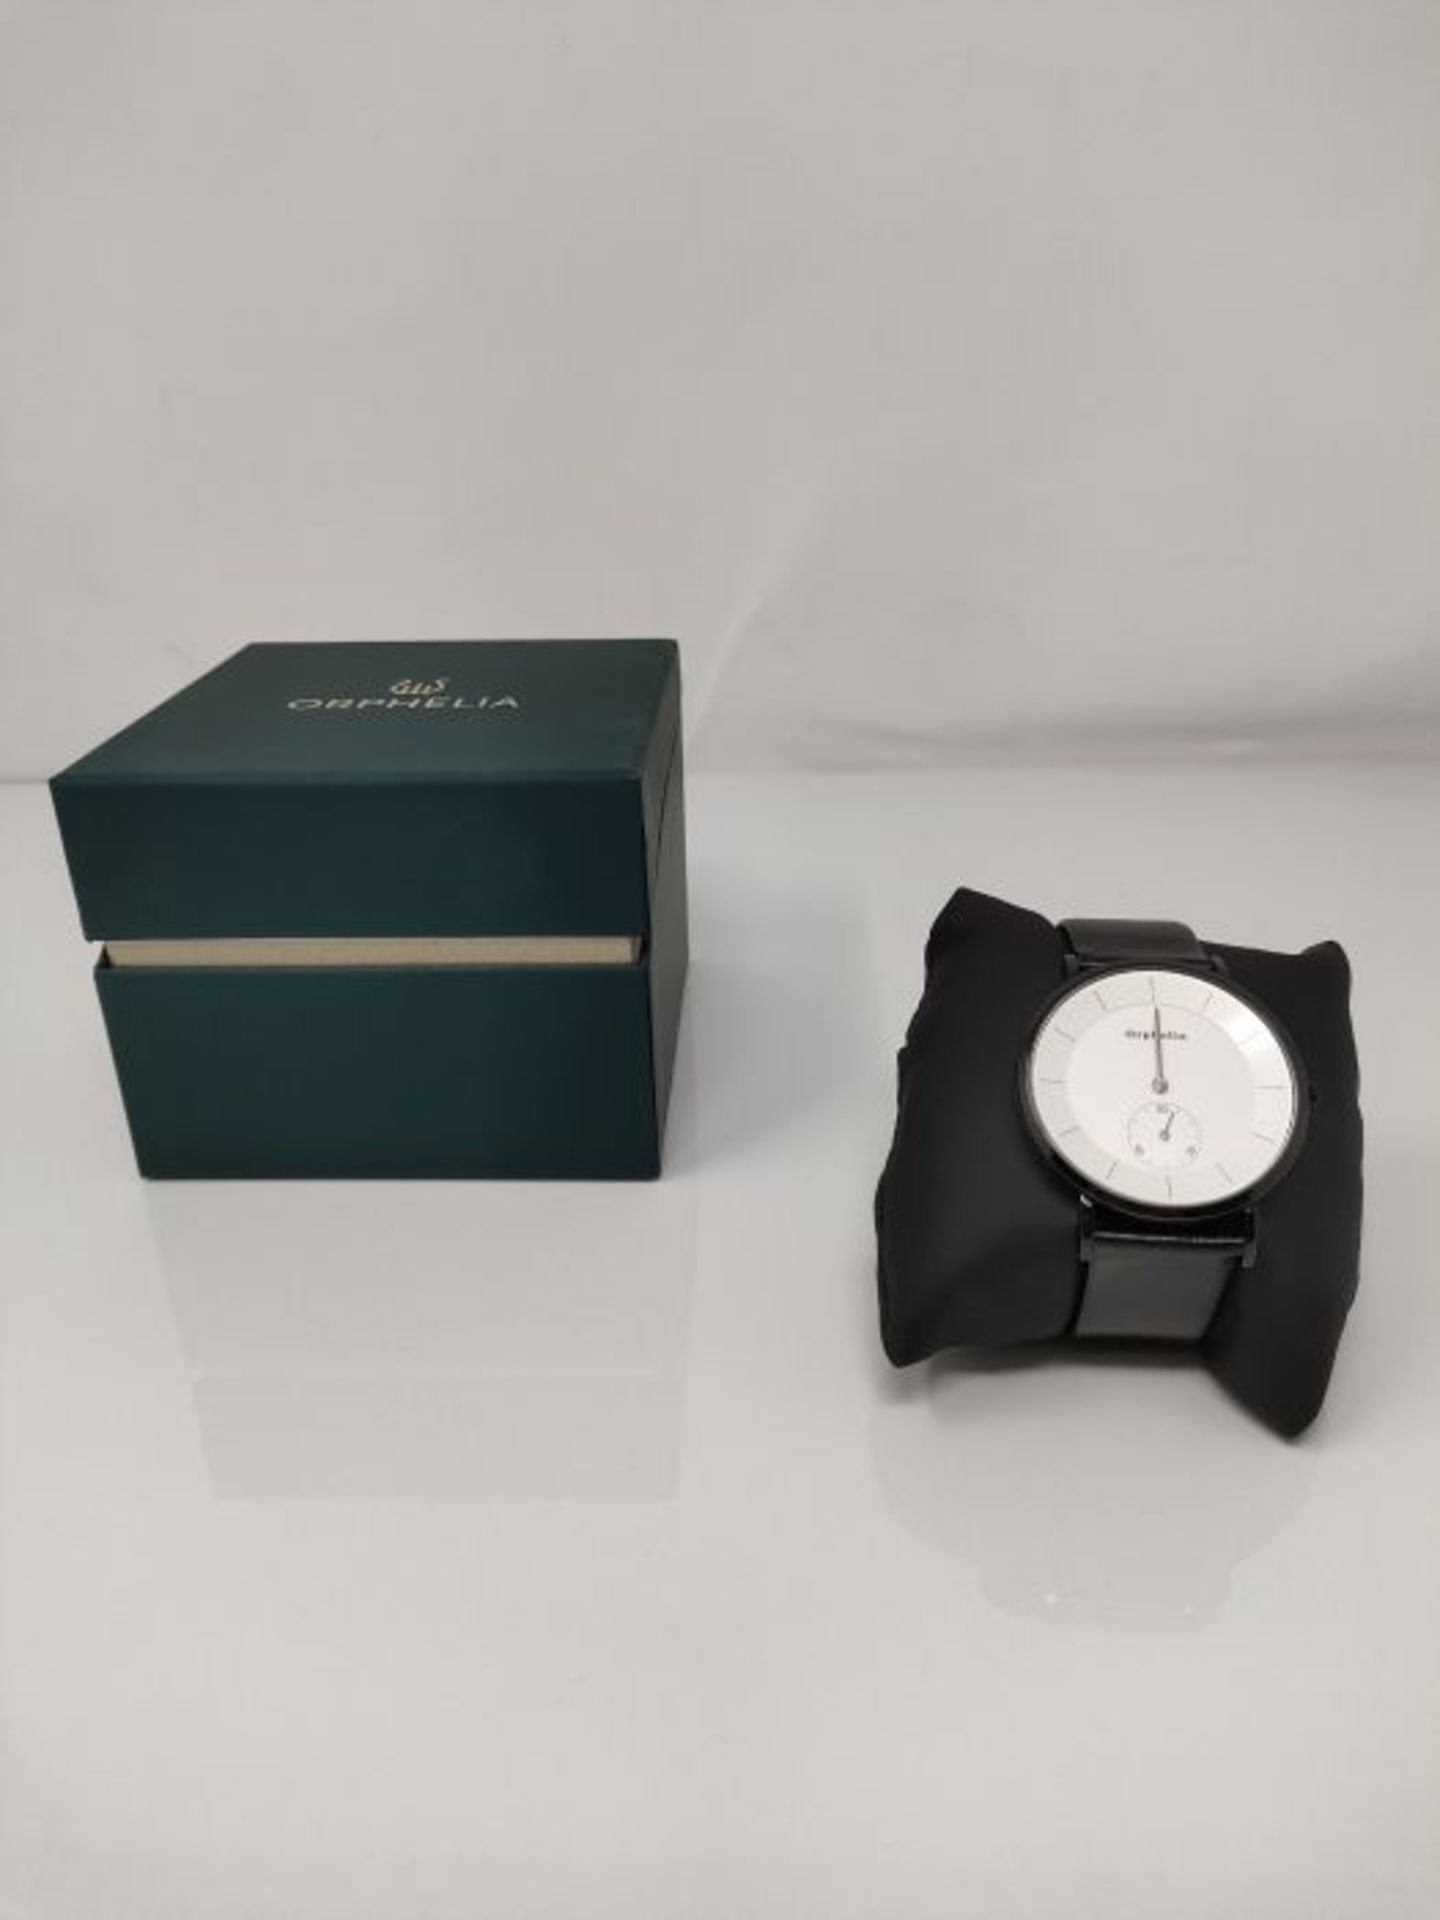 Orphelia Women's Quartz Watch with White Dial and Black Leather Strap - Image 6 of 6